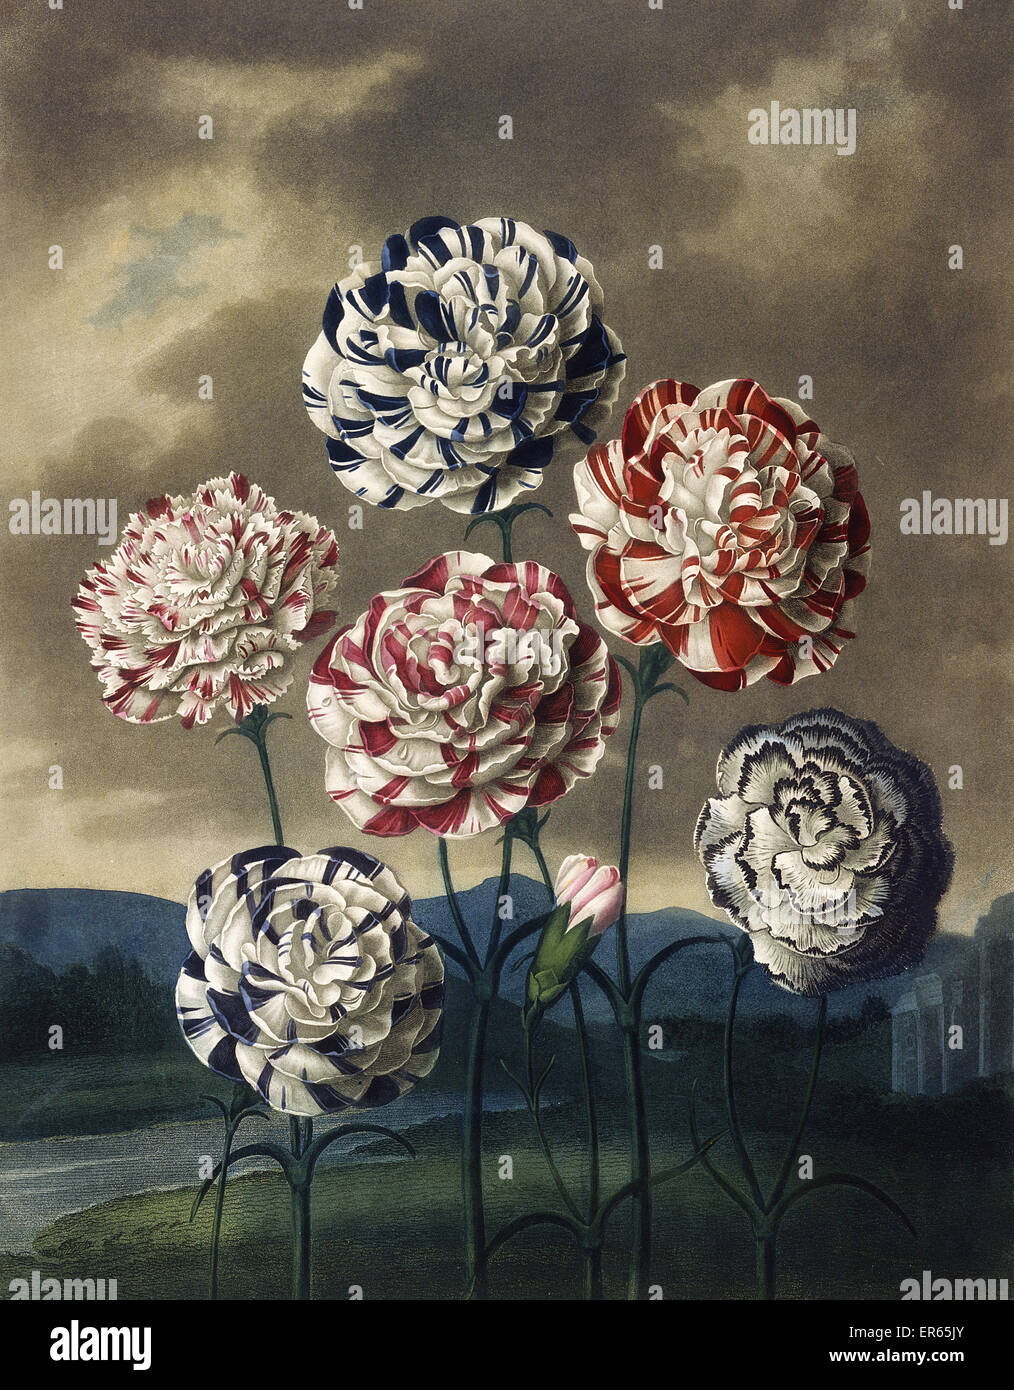 A Group of Carnations Stock Photo